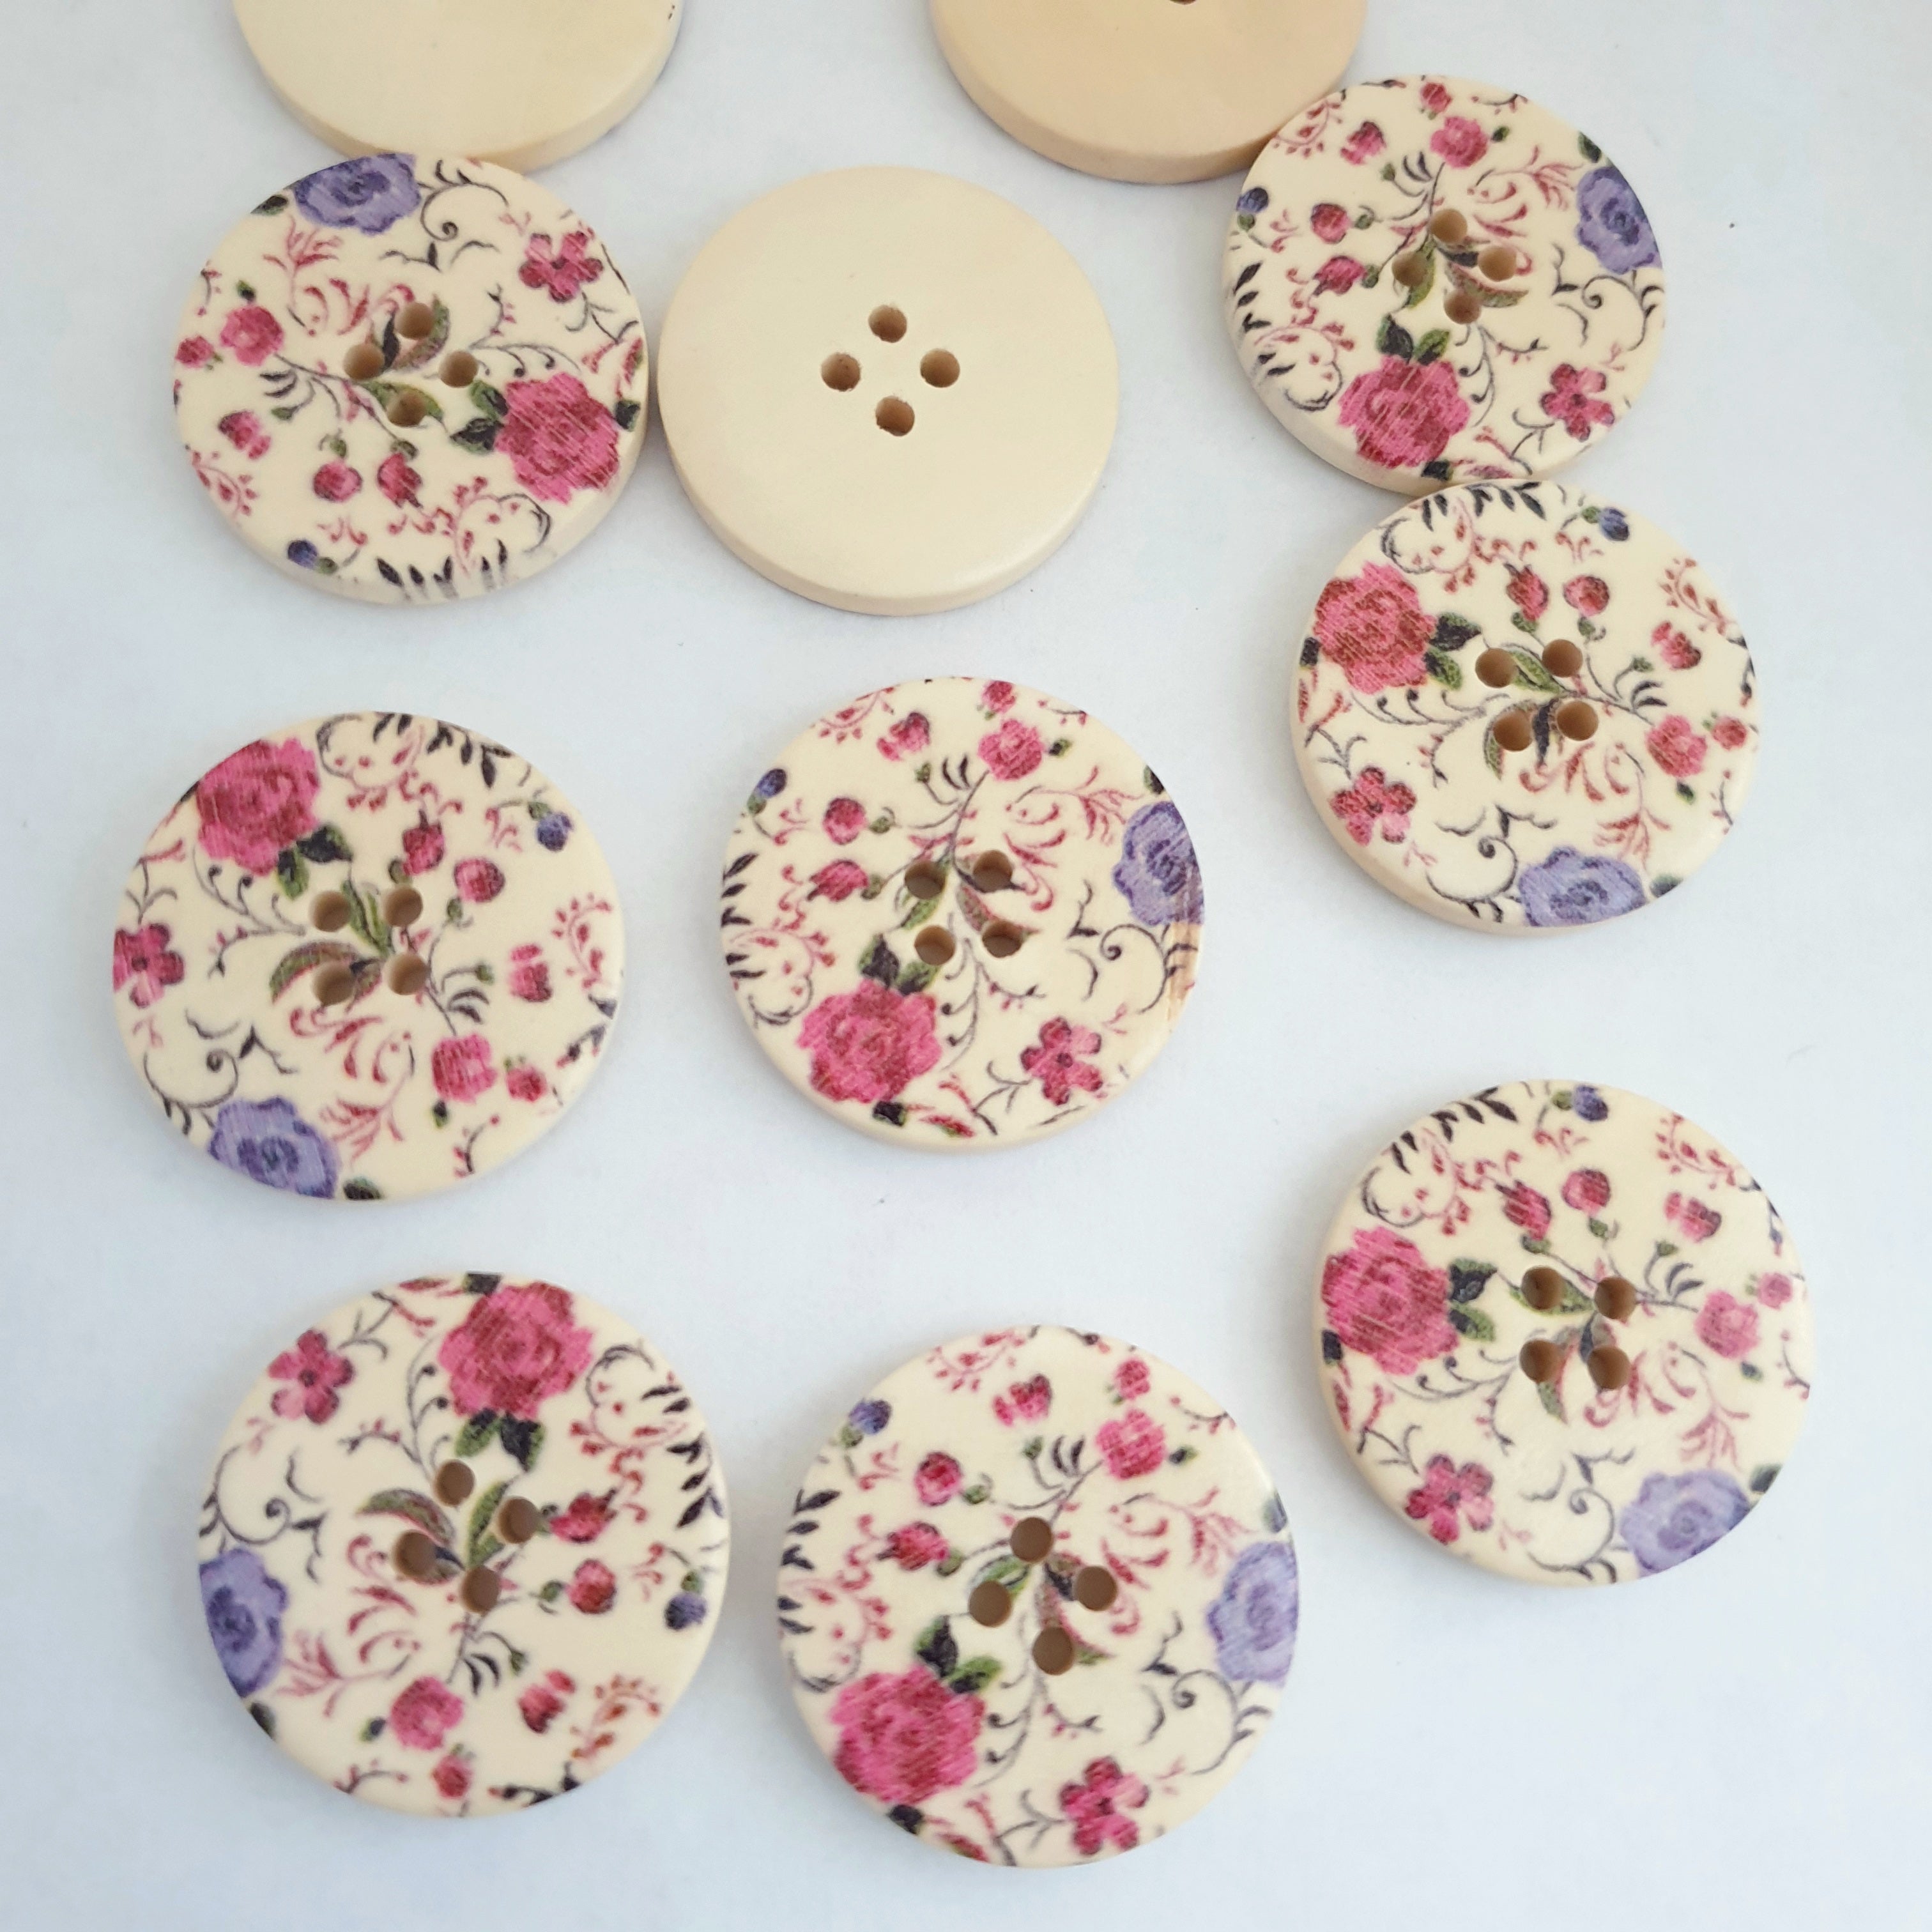 MajorCrafts 16pcs 30mm Rose Pink & Lavender Floral Pattern 4 Holes Round Large Wooden Sewing Buttons